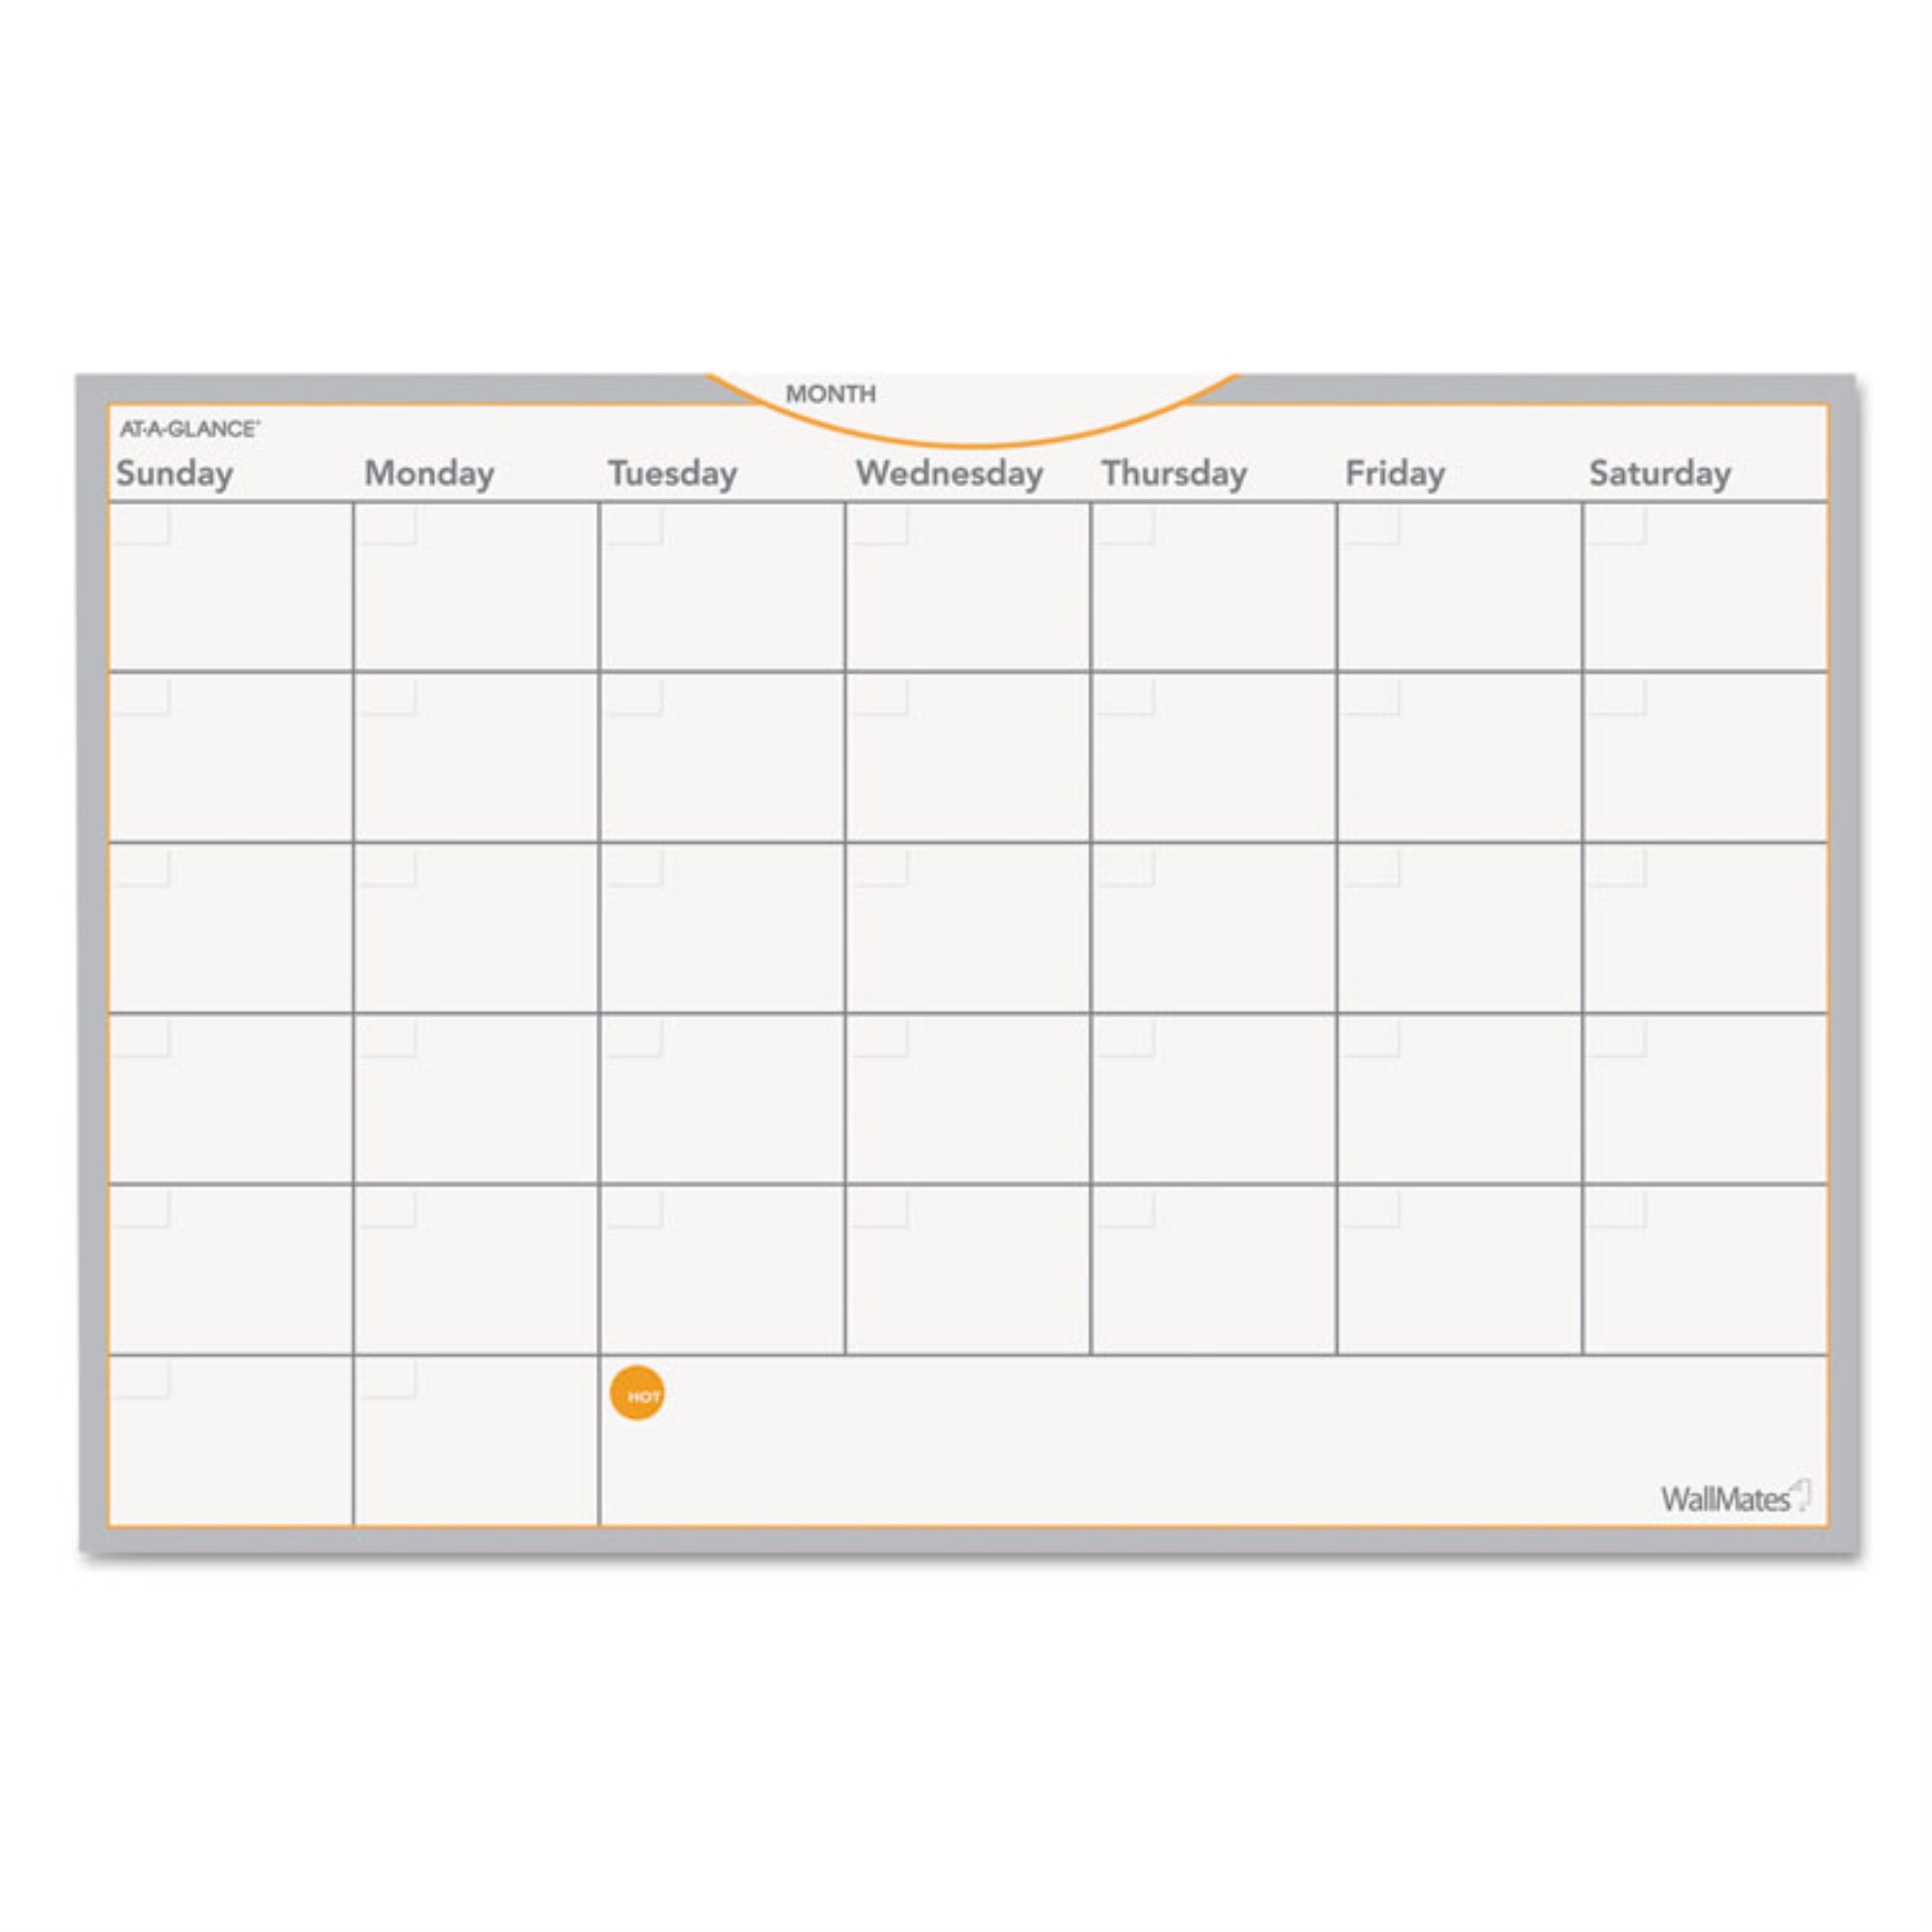 AT-A-GLANCE AW602028 WallMates Self-Adhesive Dry Erase Monthly Planning Surface 36 x 24